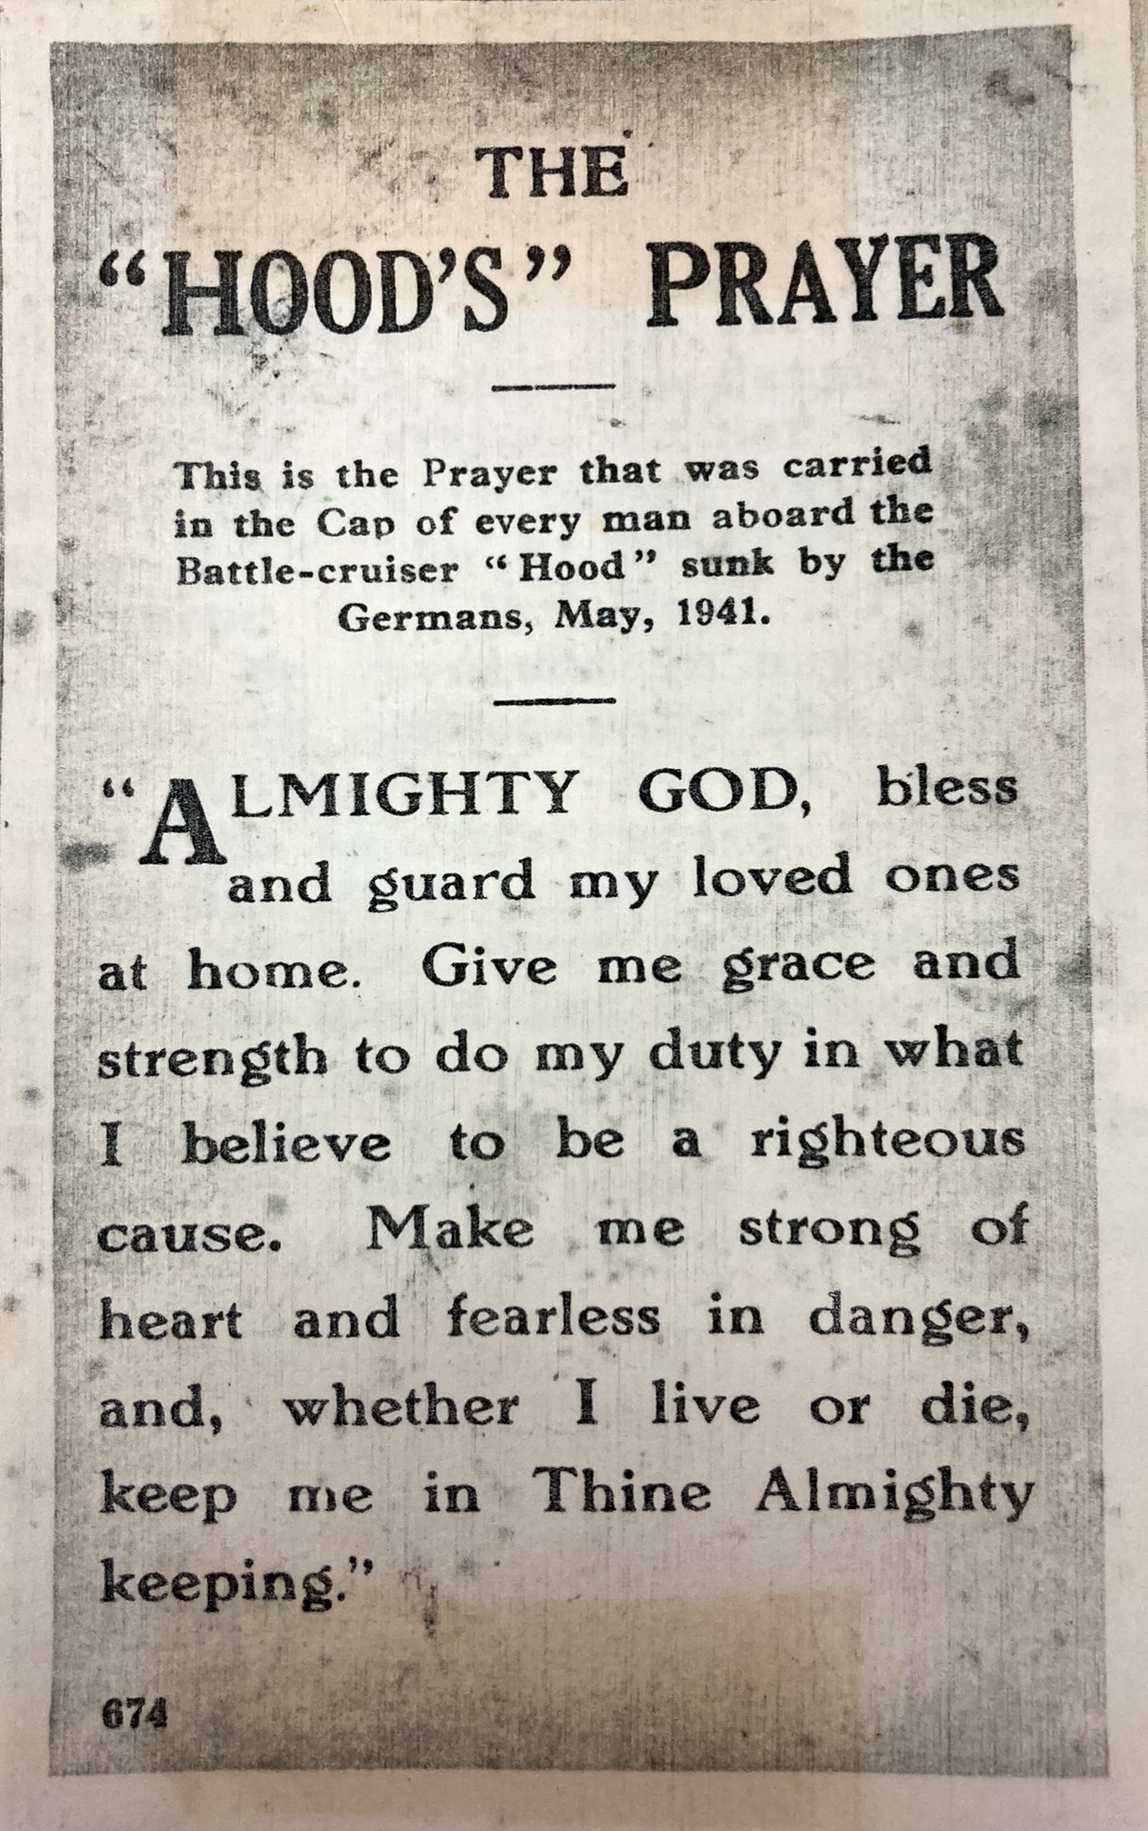 A postcard of the Hoods Prayer, written by Applegarth children and worn in the caps of every sailor on the ship